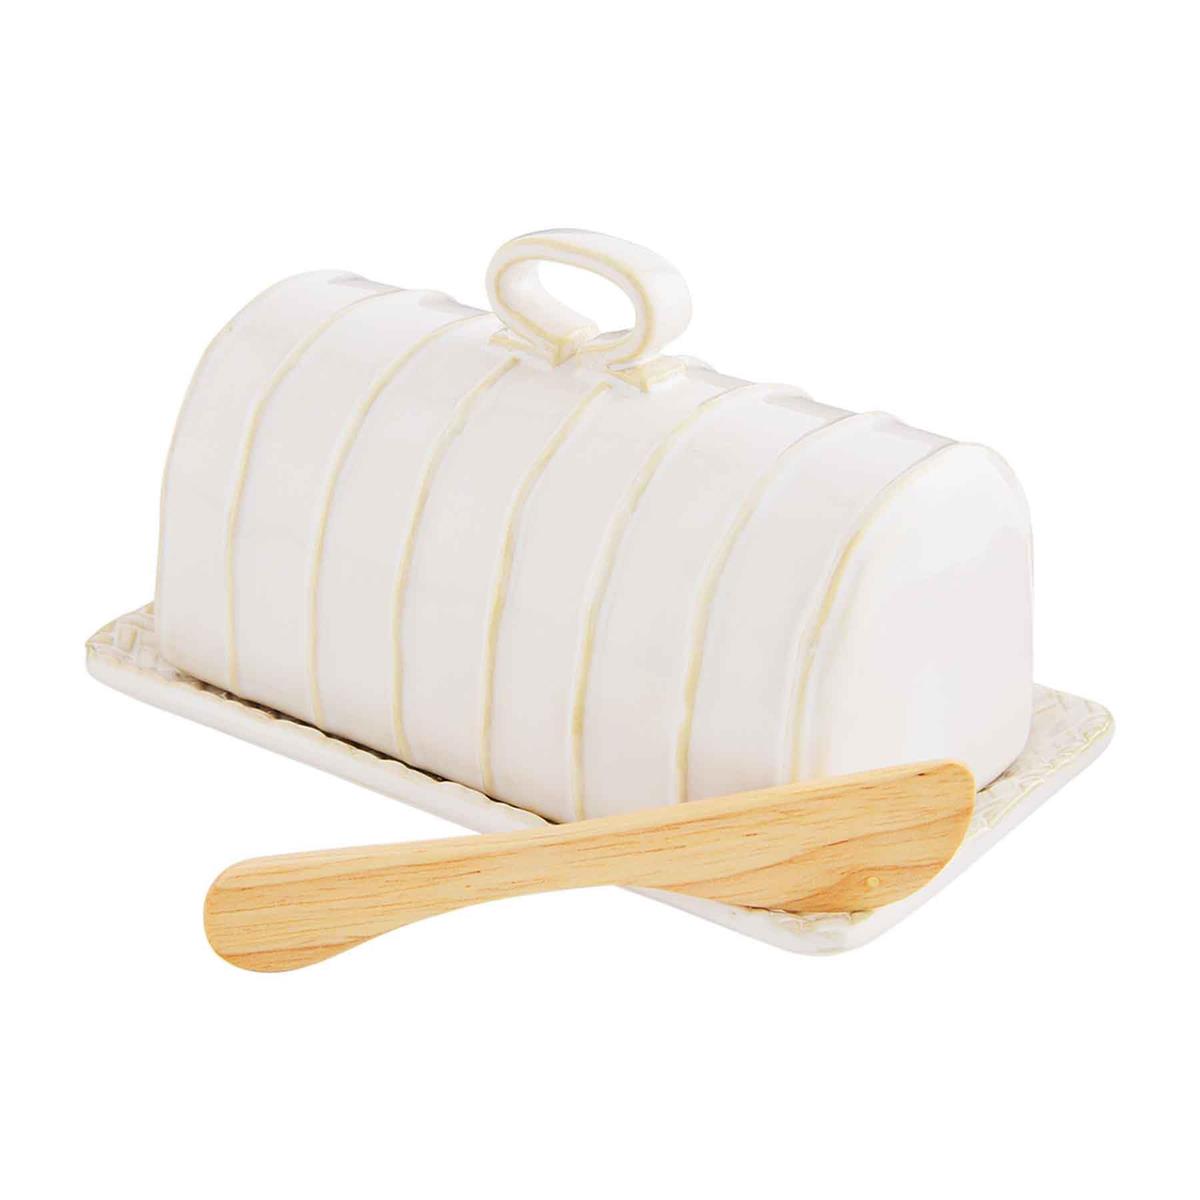 textured butter dish set on a white background